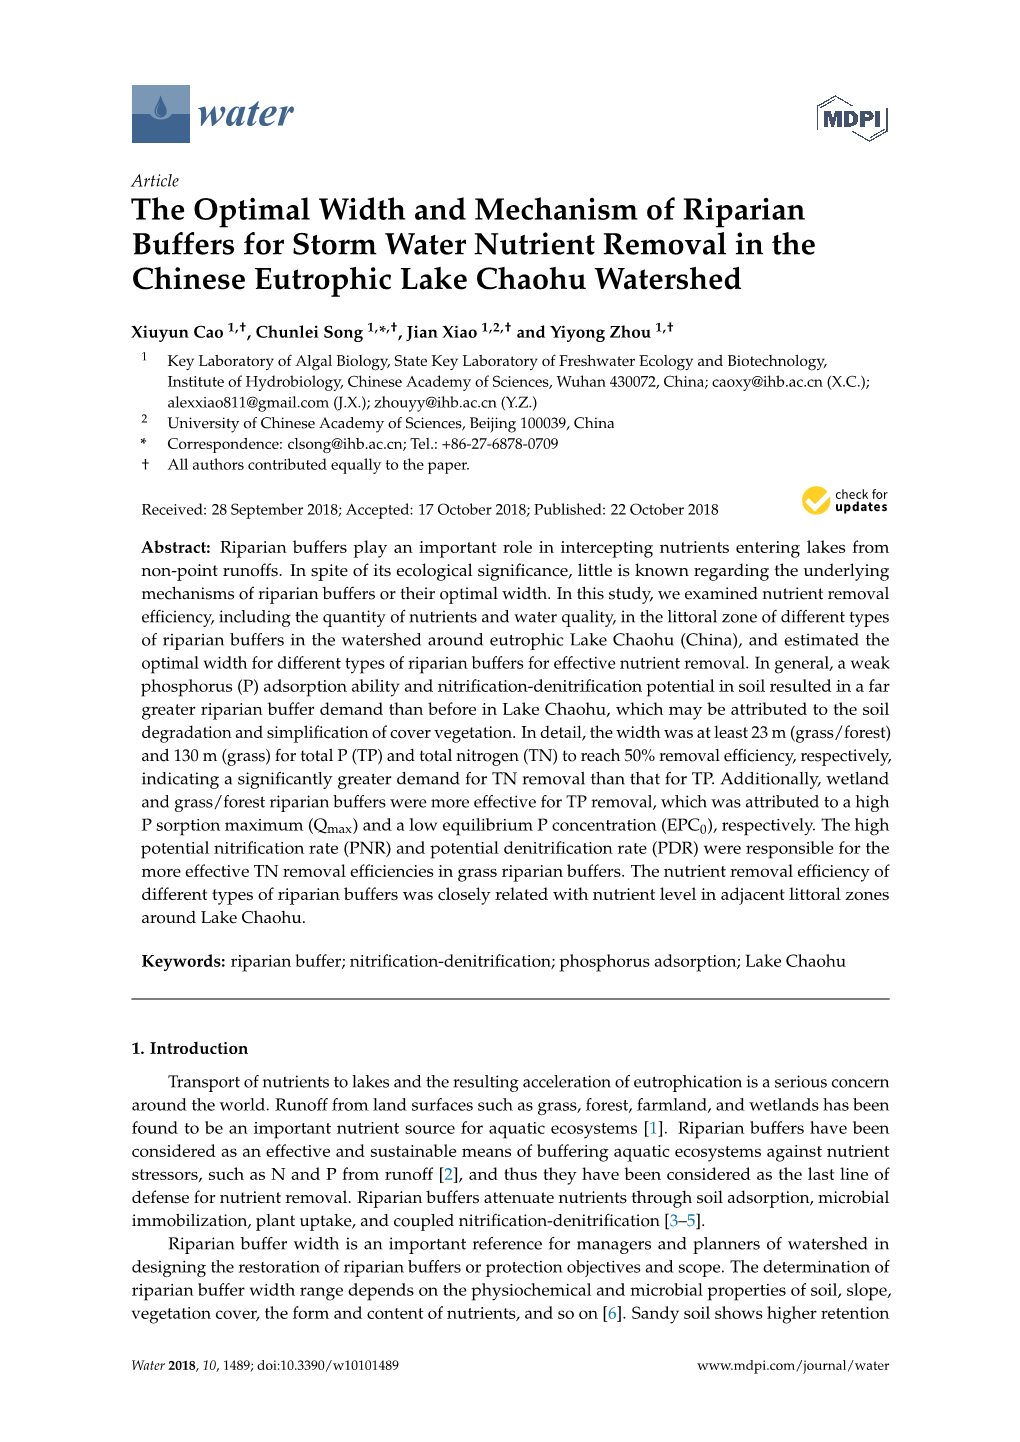 The Optimal Width and Mechanism of Riparian Buffers for Storm Water Nutrient Removal in the Chinese Eutrophic Lake Chaohu Watershed